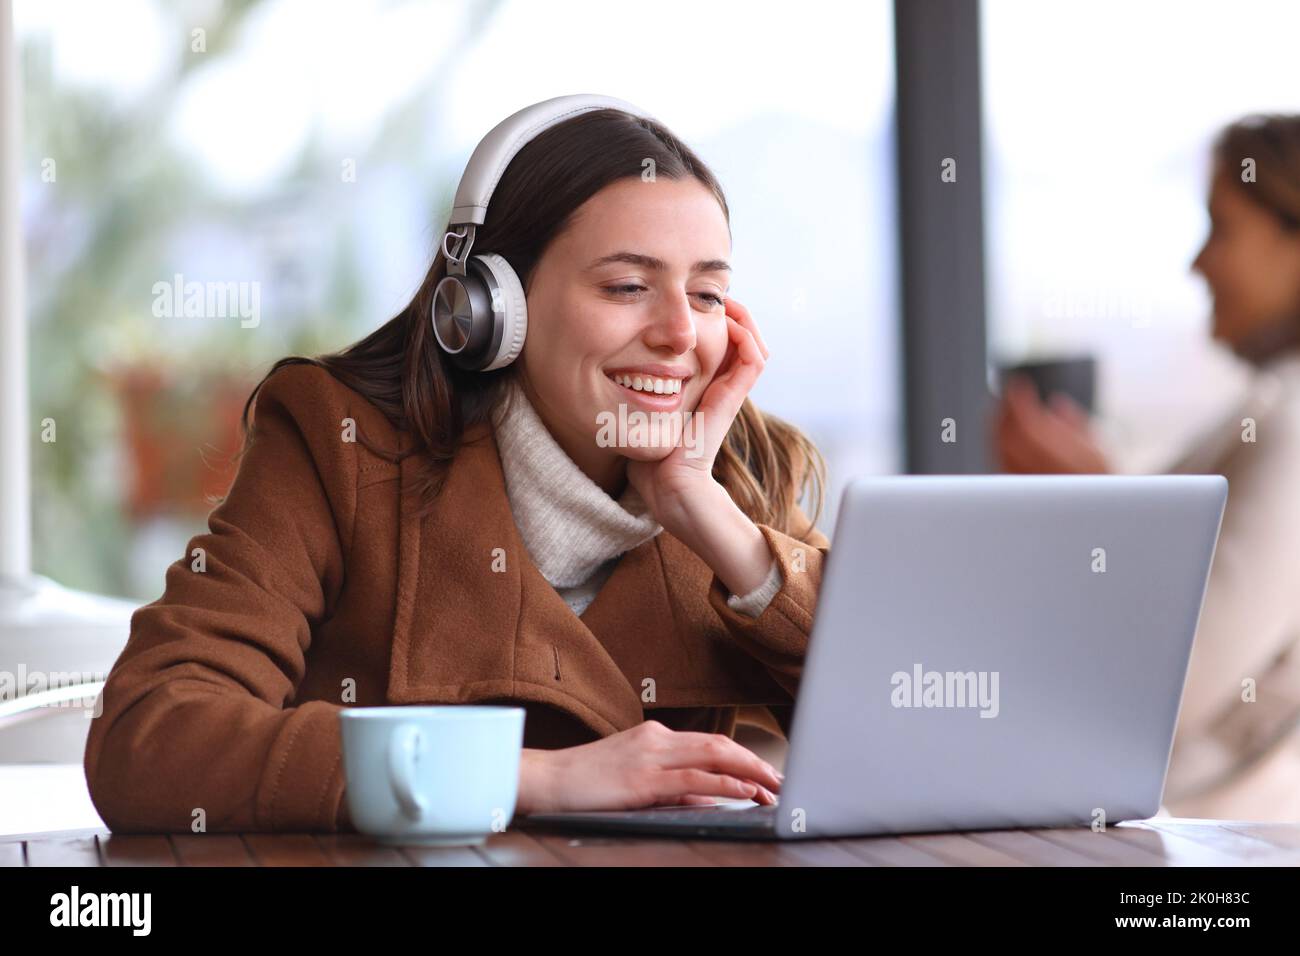 Happy woman in a bar watching media on laptop Stock Photo